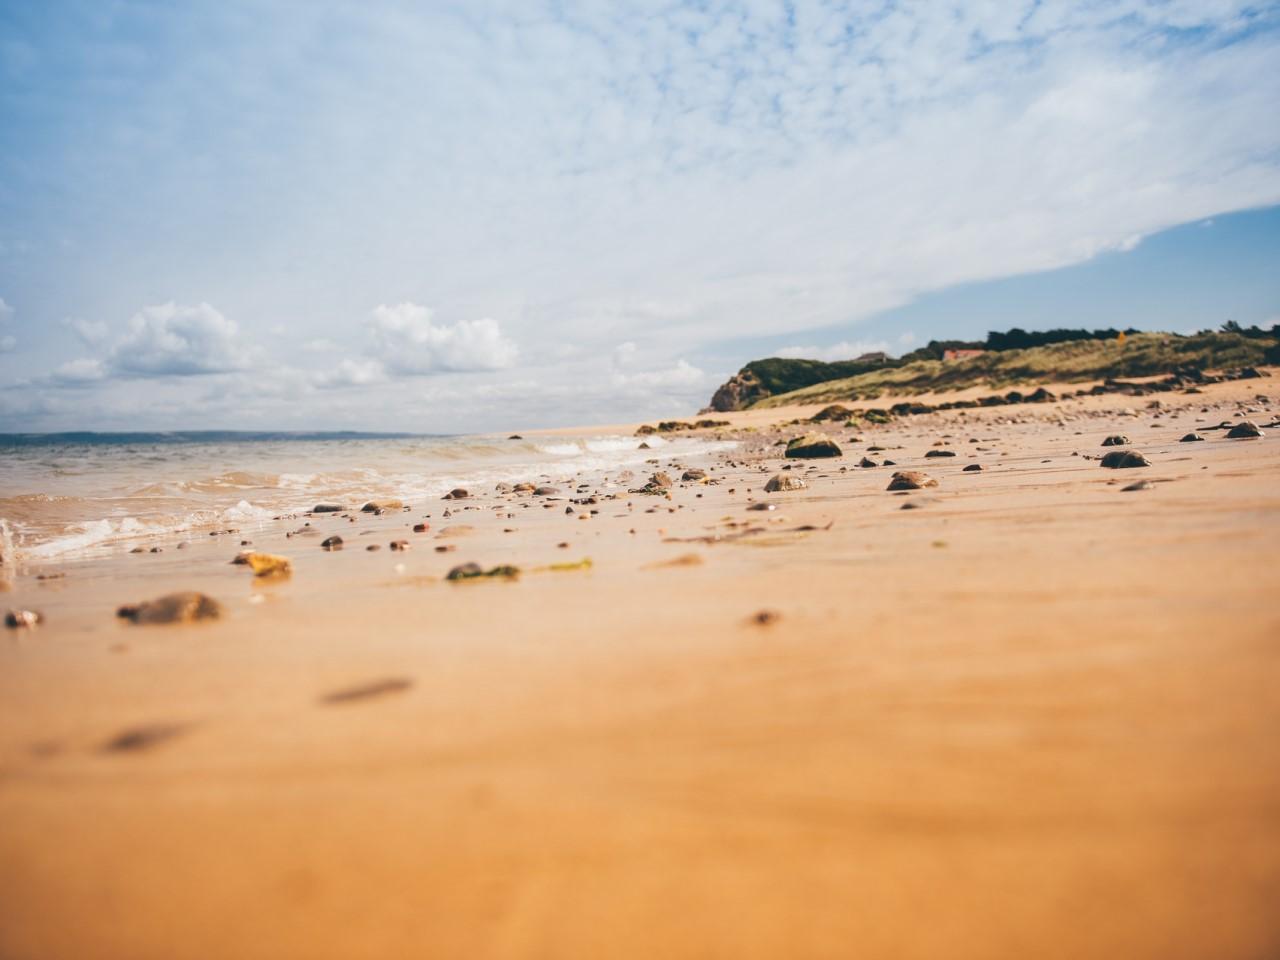 Long landscape shot of a golden beach, showing the shore and sky, with a bank out of focus in the distance.